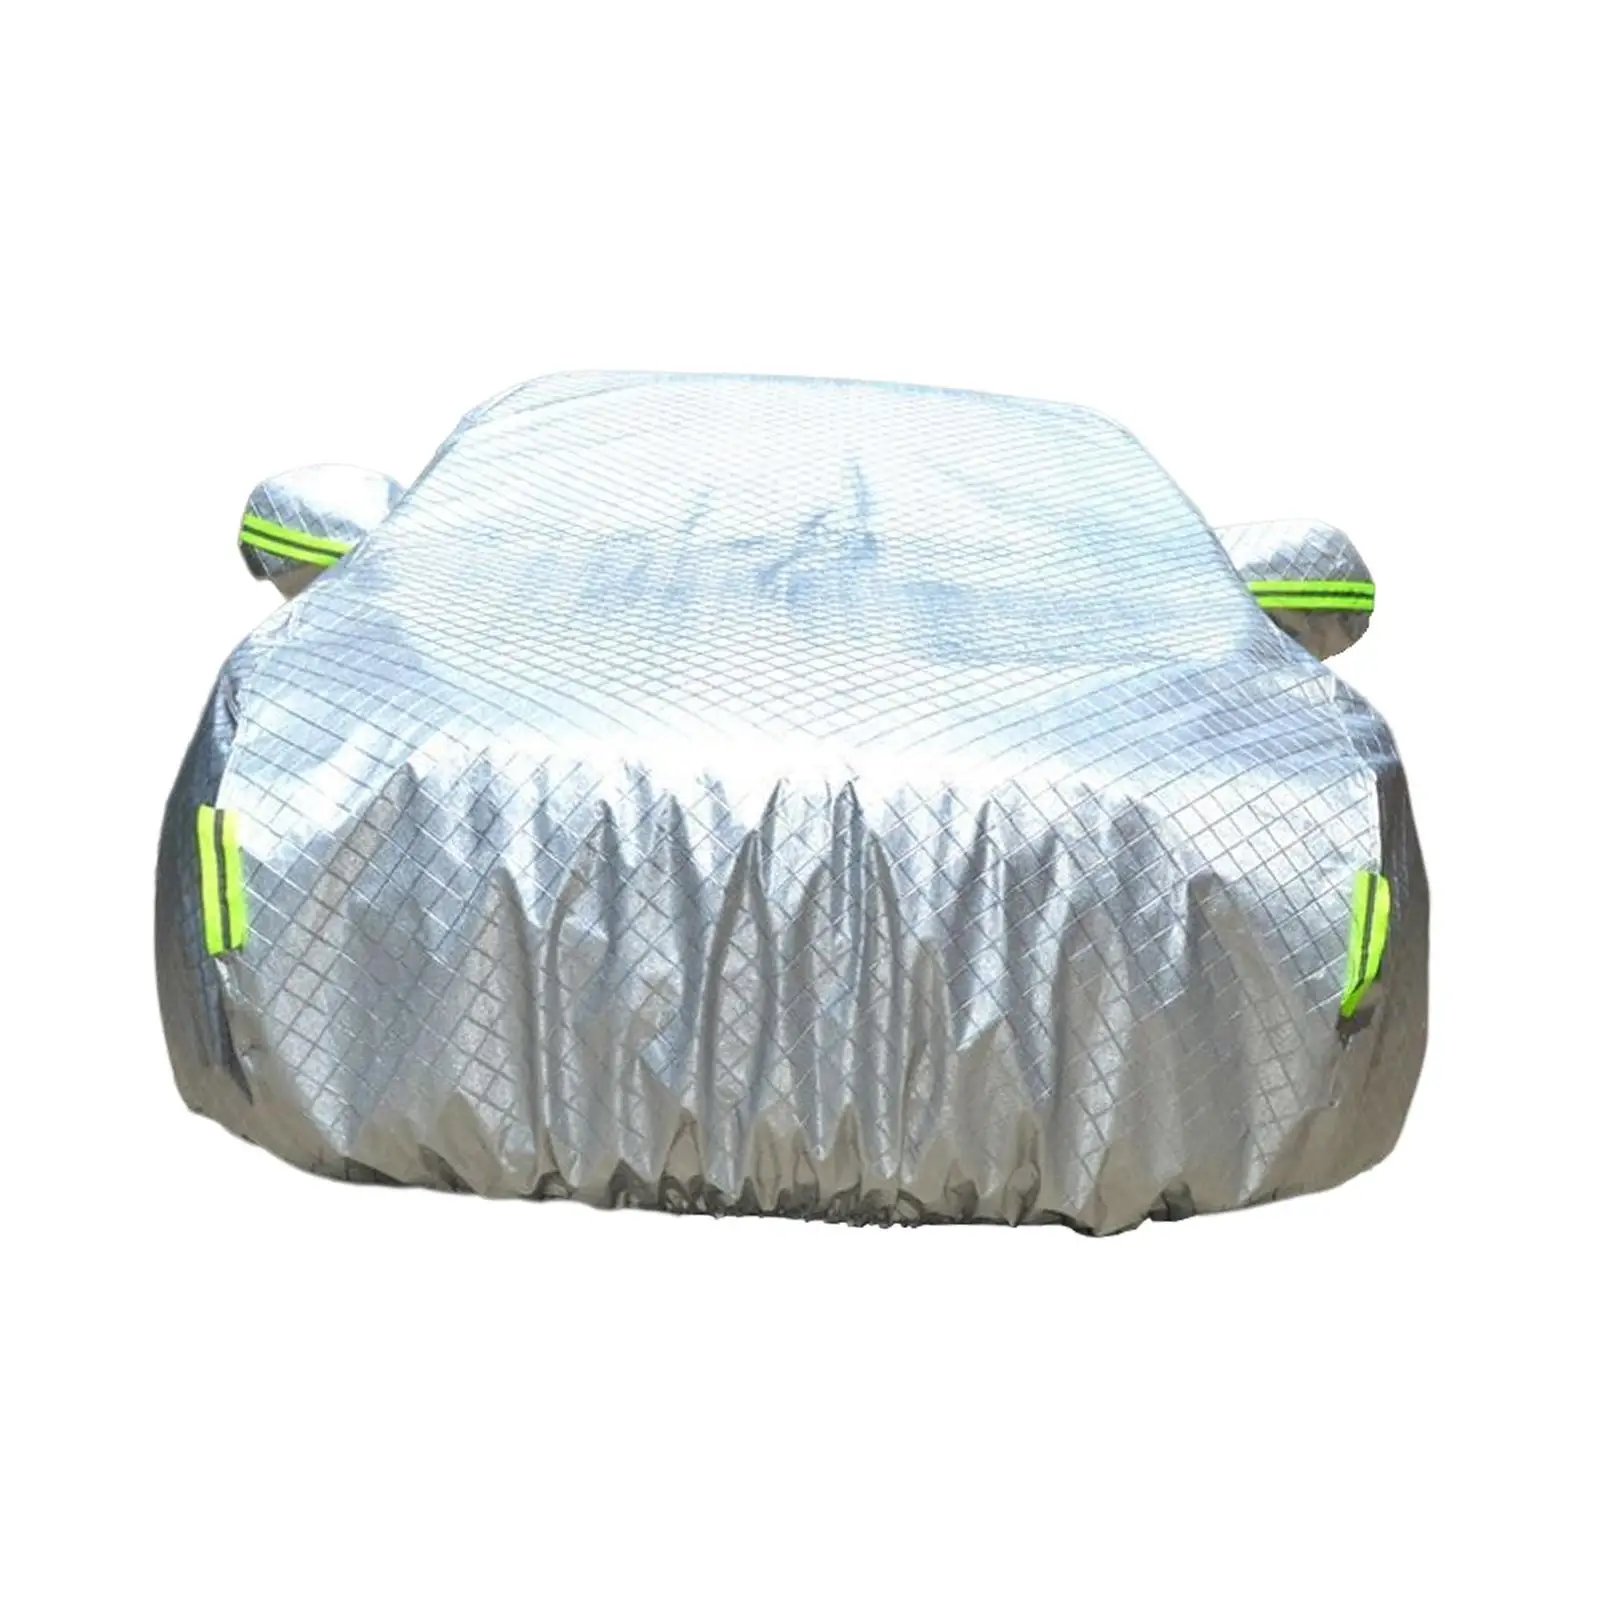 All Seasons Car Cover Water Resistant Exterior Accessories Rain Snow Dust Sun Shade Protector for Byd Atto 3 Yuan Plus